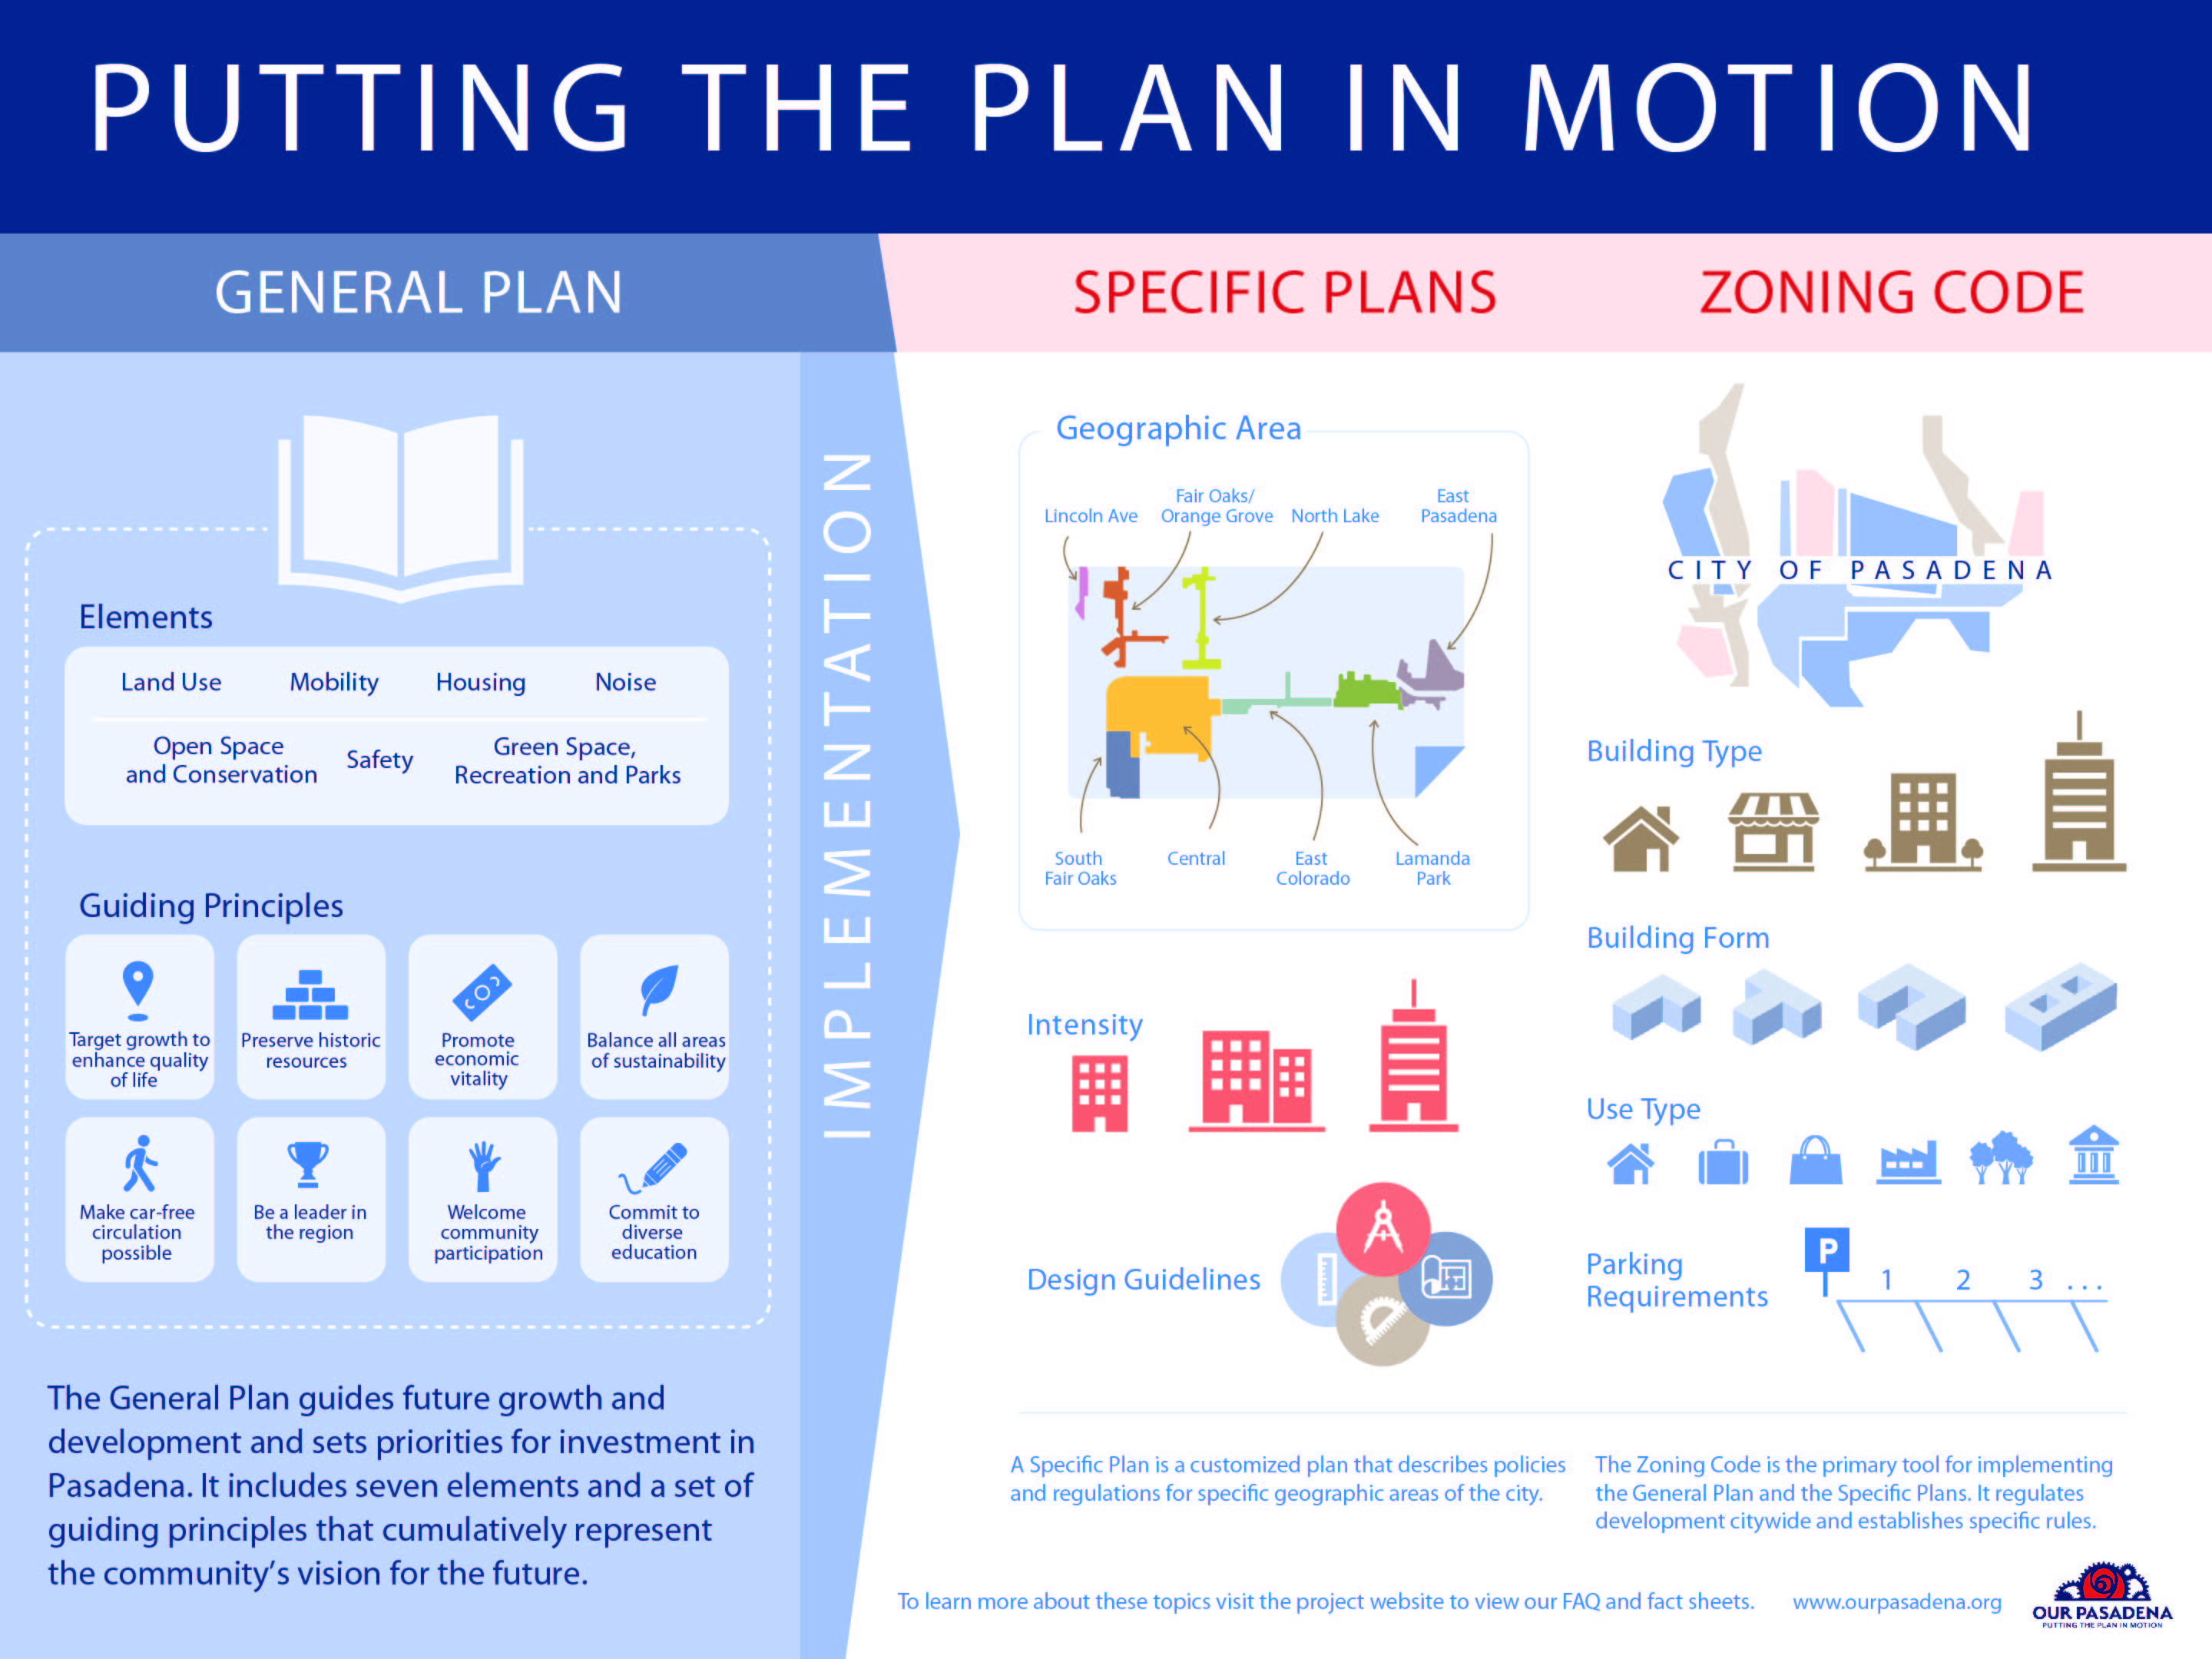 An overview of the General Plan Elements and Guiding Principles and highlights two implementation tools, Specific Plans and Zoning Code. 